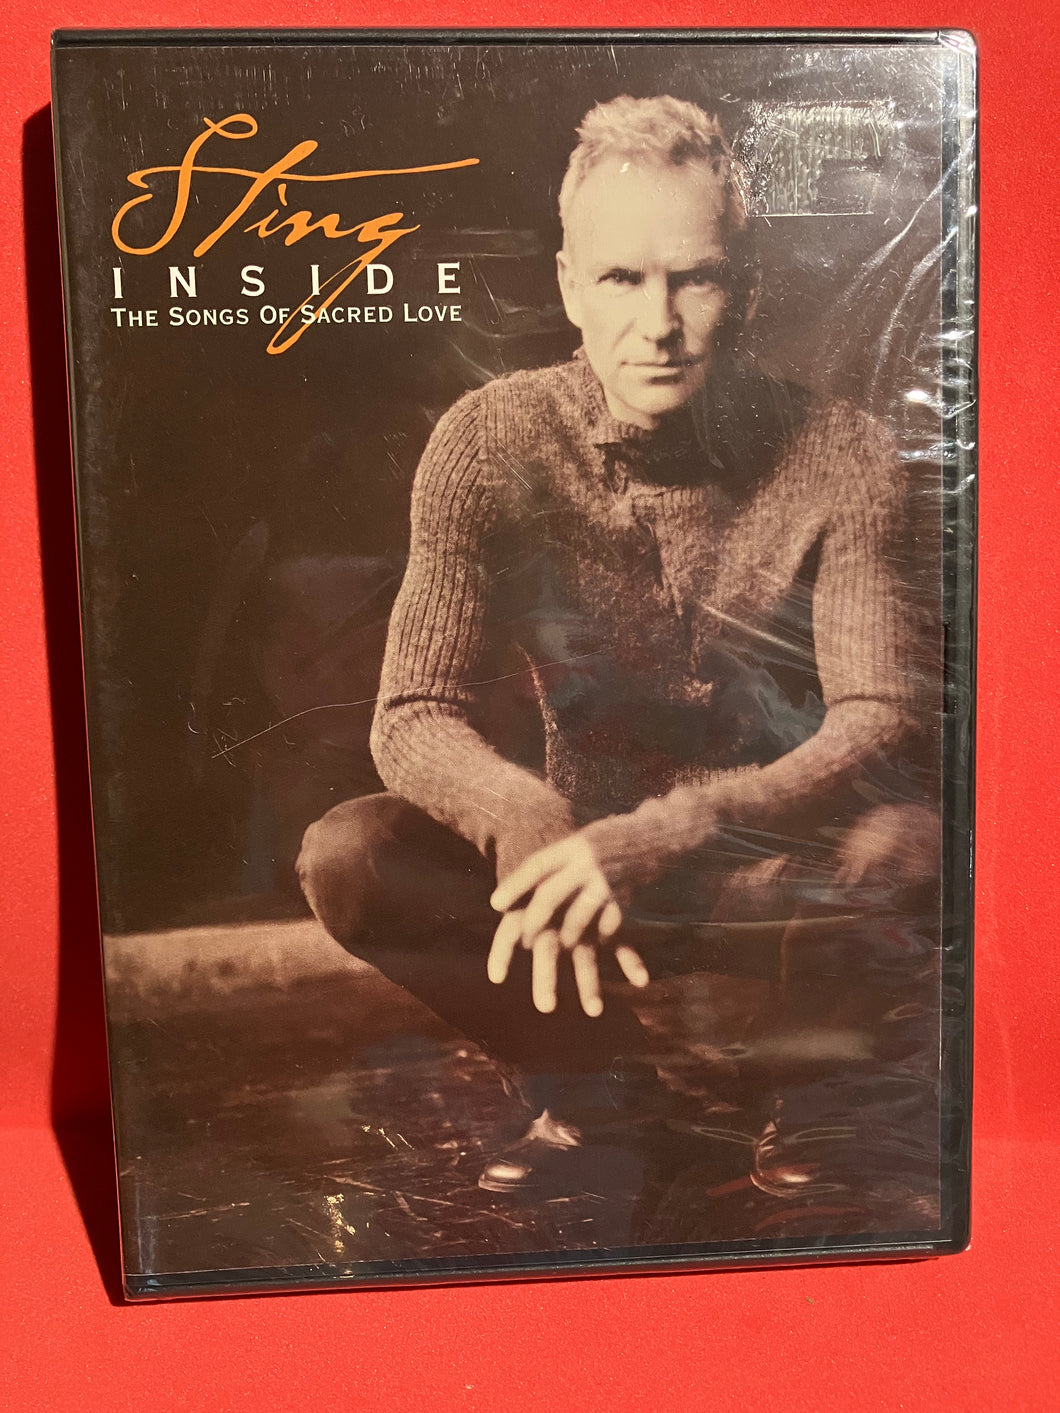 STING - INSIDE THE SONGS OF SACRED LOVE DVD (SEALED)